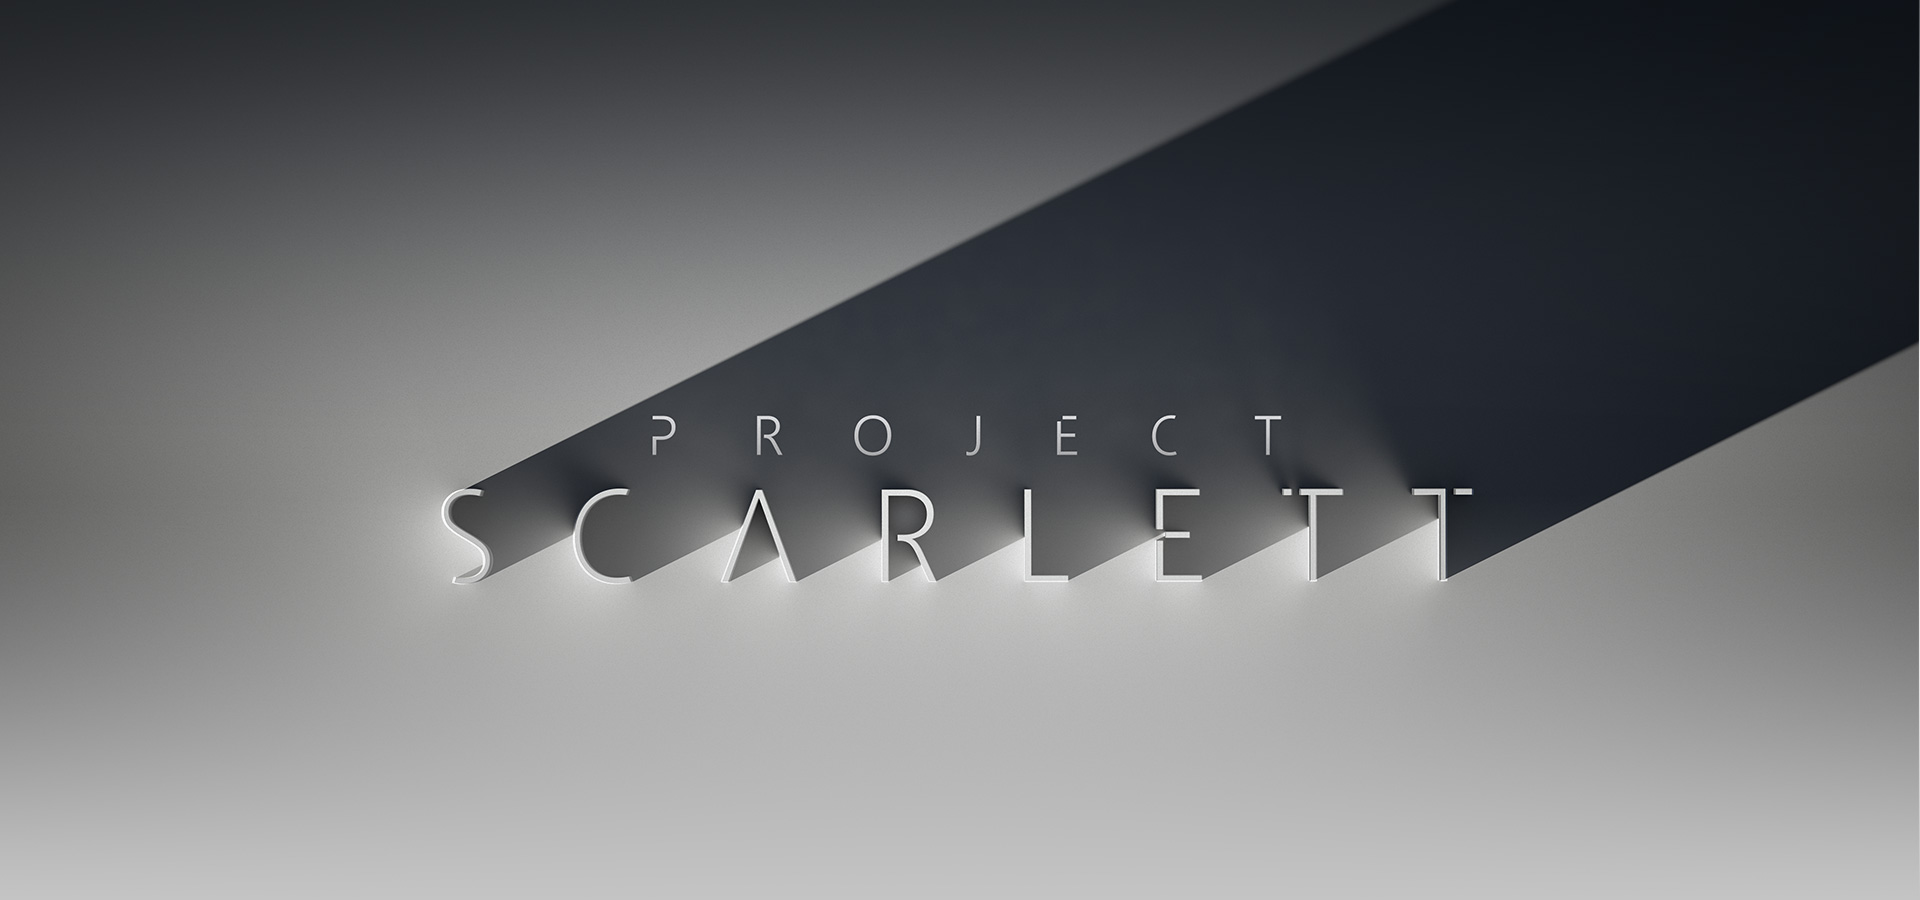 Xbox Boss Assures Fans That Project Scarlett “Won’t Be Out Of Position On Power Or Price”